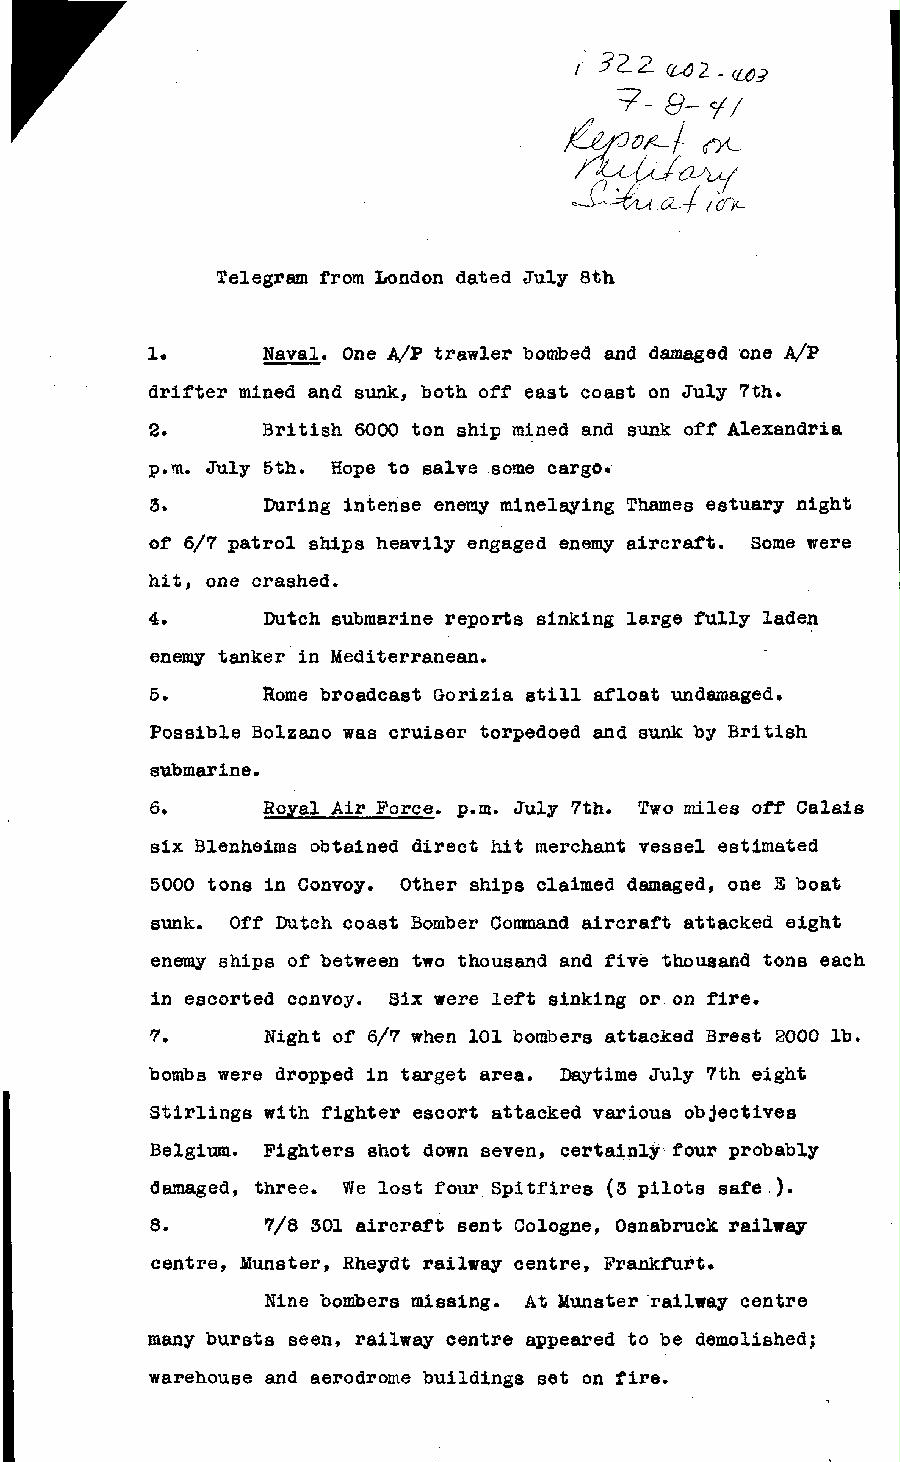 [a322e02.jpg] - Report on military situation 7/8/41